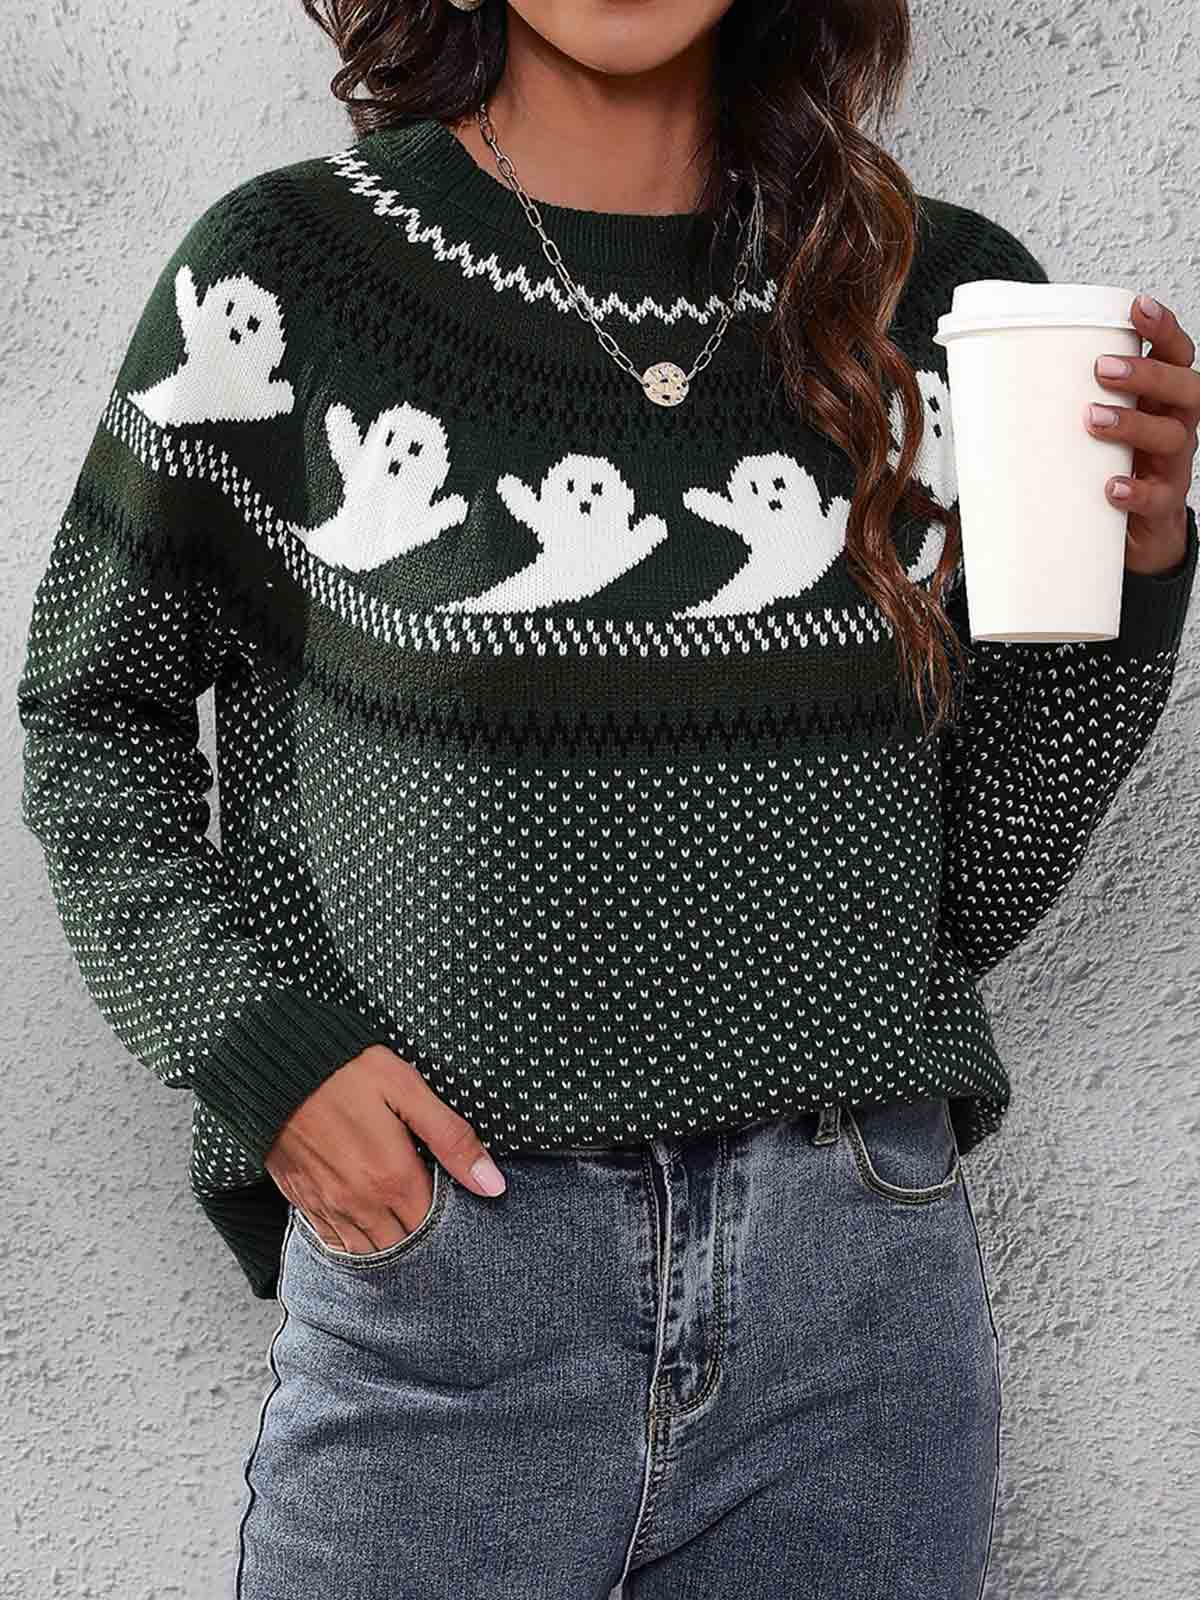 Ghost Print Knit Sweater